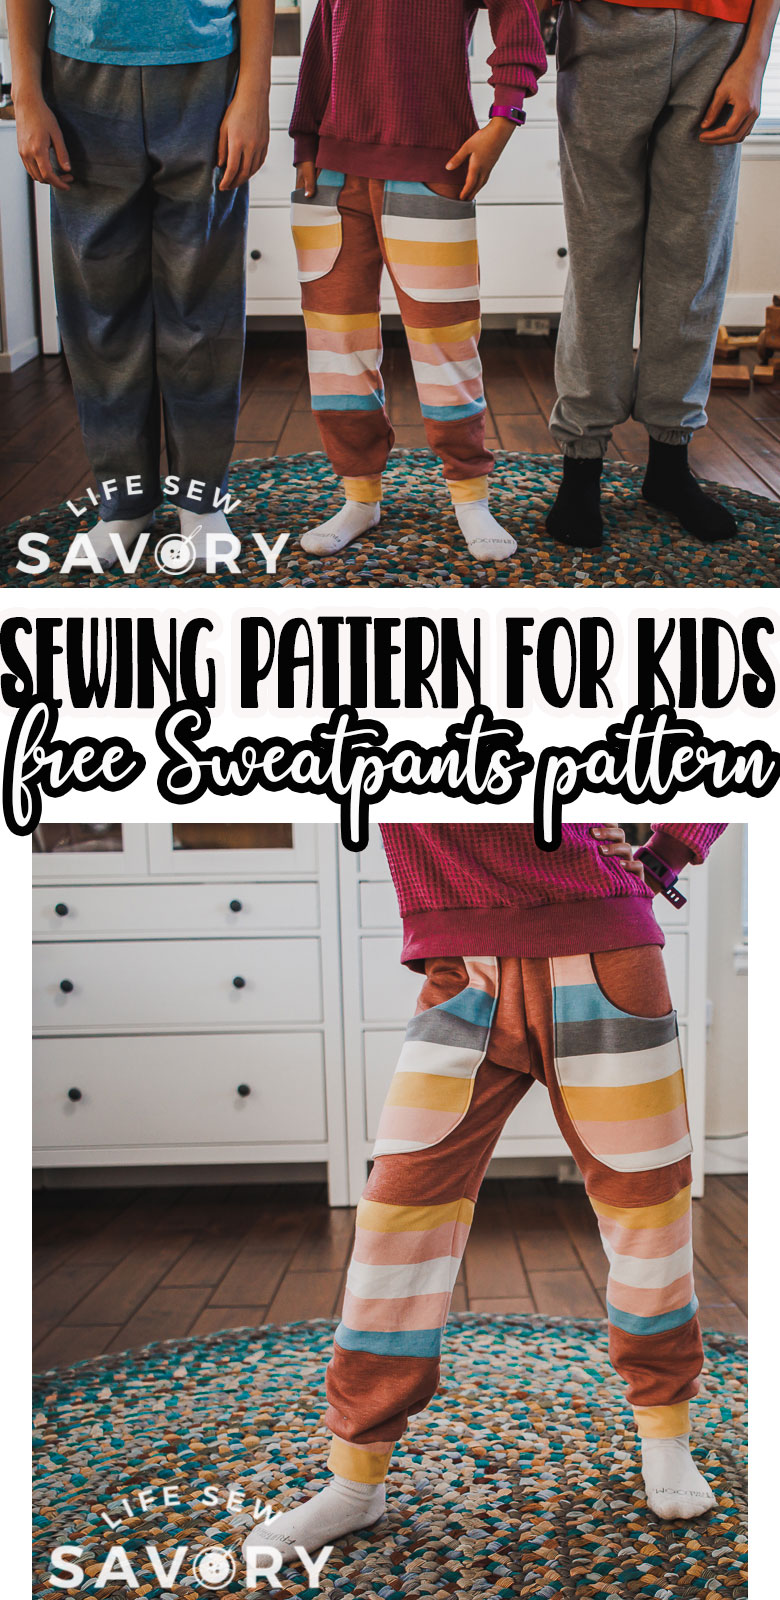 Sewing for Children is my favorite thing. Check out this free unisex sweatpants pattern that will give you a free pattern as well as a tutorial for how to sew sweatpants.